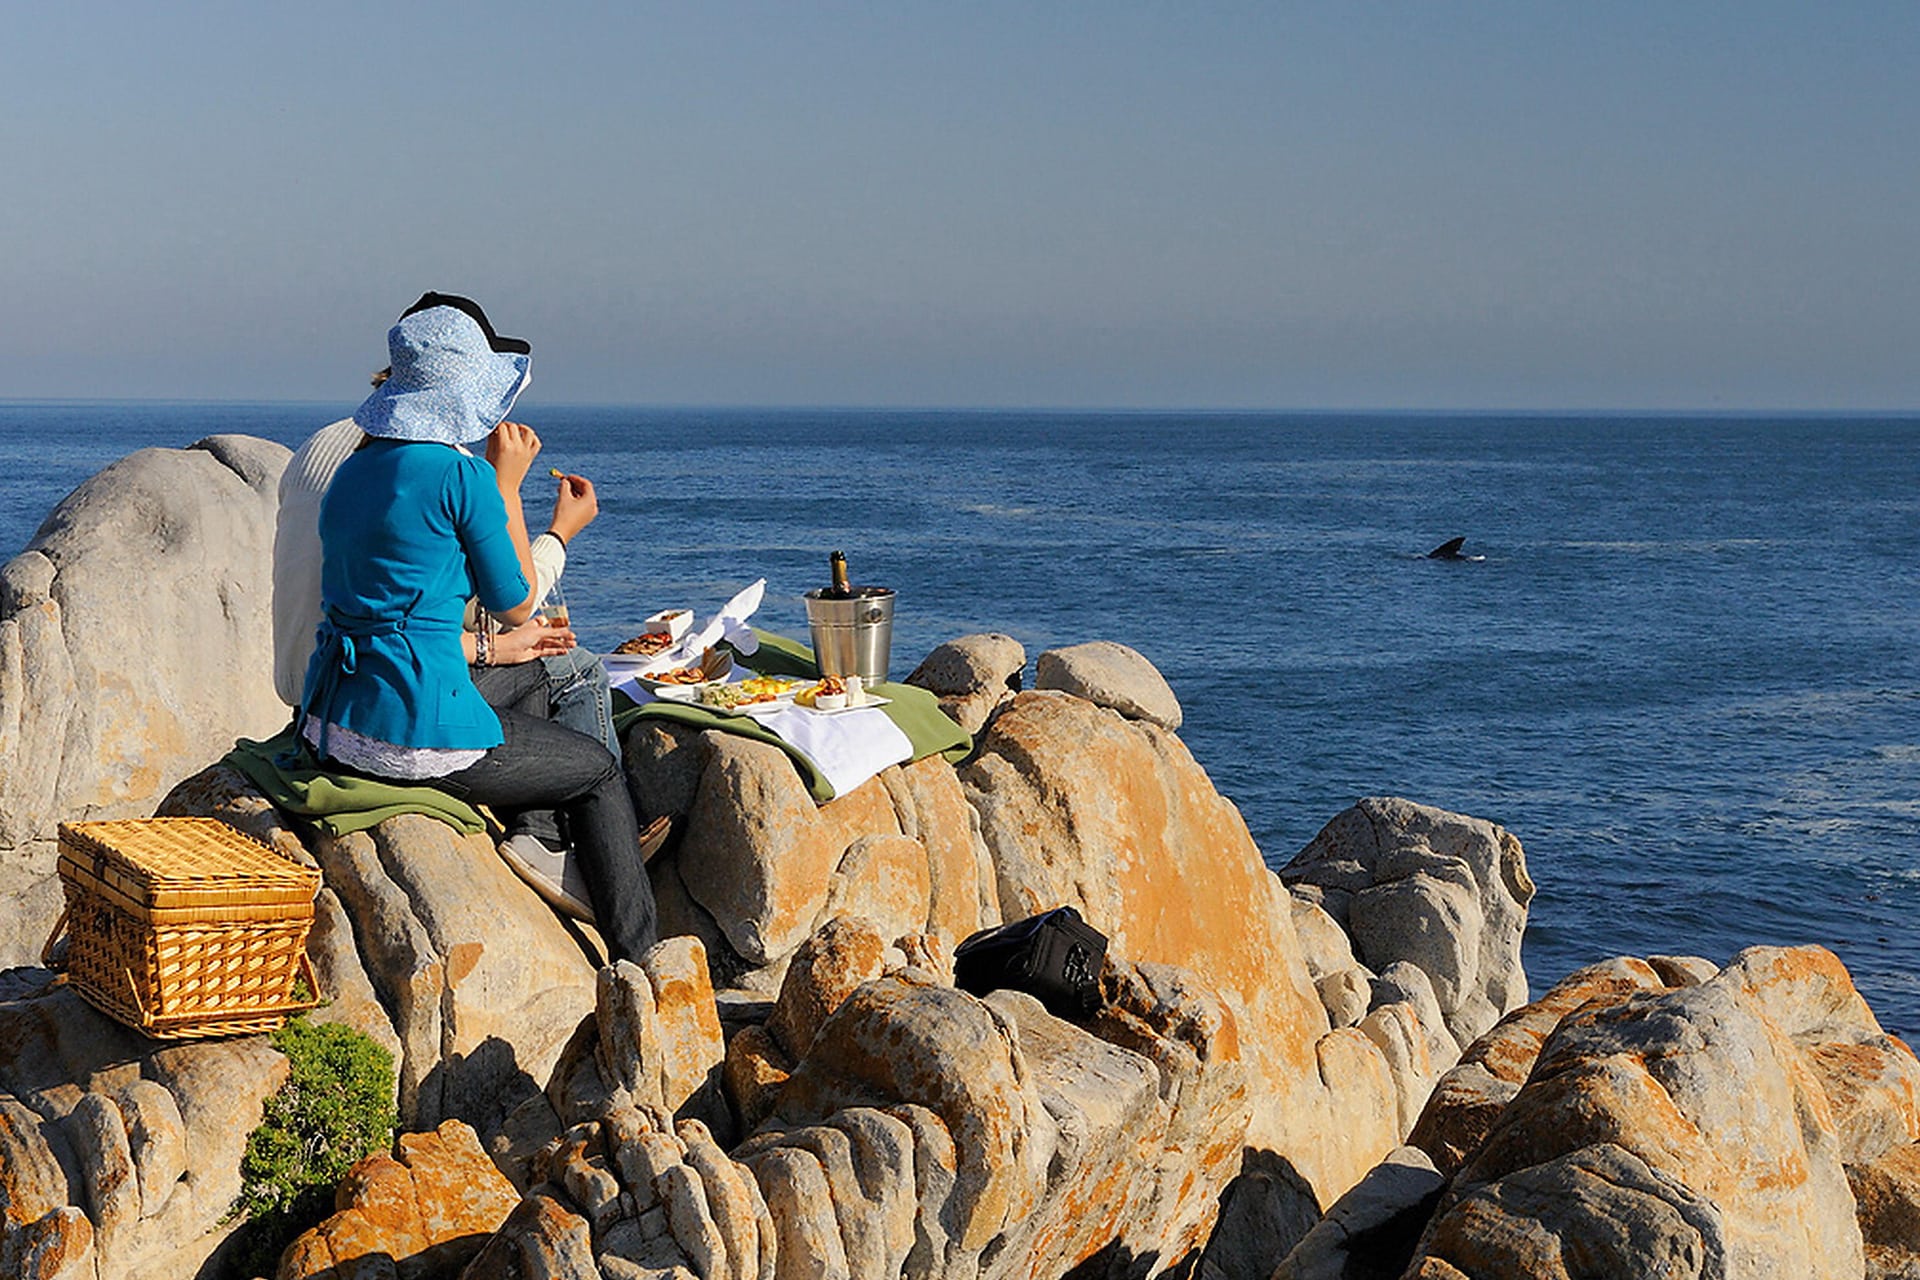 Whale watching while staying at Grootbos Forest Lodge